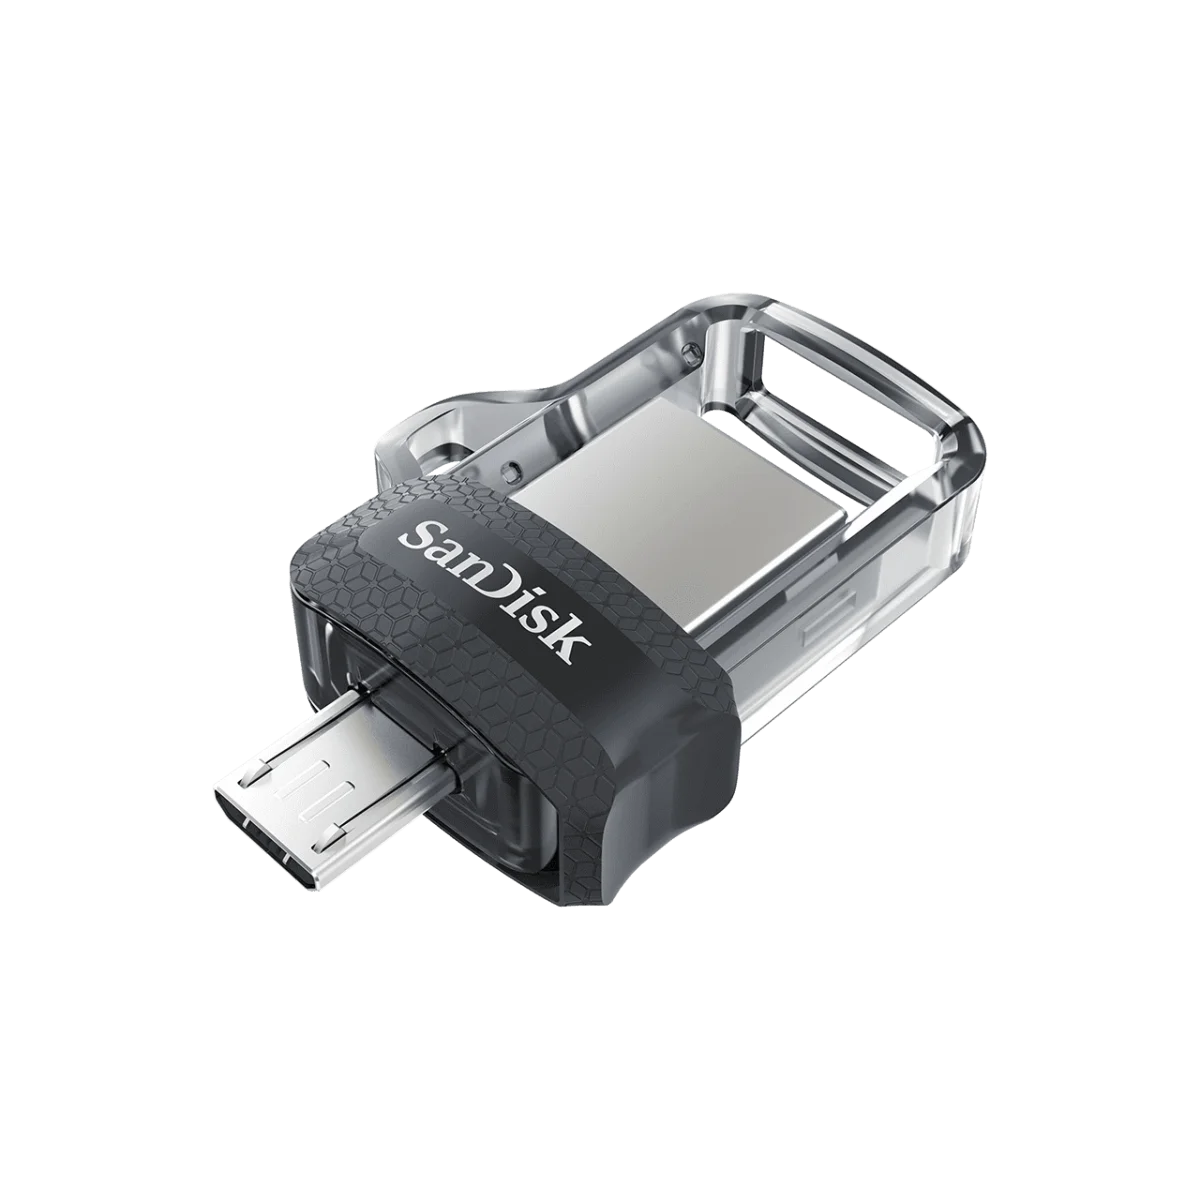 Ultra Dual Drive Usb M 3 Open Angled2.Png.thumb .1280.1280 Sandisk &Amp;Lt;Div Class=&Amp;Quot;Active&Amp;Quot; Data-Sku=&Amp;Quot;Sddd3-016G-A46&Amp;Quot;&Amp;Gt; &Amp;Lt;H1&Amp;Gt;Instantly Free Up Space On Your Android Smartphone&Amp;Lt;/H1&Amp;Gt; &Amp;Lt;Div Class=&Amp;Quot;Inheritpara Mb-4&Amp;Quot;&Amp;Gt; The Sandisk Ultra® Dual Drive M3.0 Makes It Easy To Transfer Content From Your Phone To Your Computer. With A Micro-Usb Connector On One End And A Usb 3.0 Connector On The Other, The Drive Lets You Move Content Easily Between Your Devices—From Your Android™ Smartphone Or Tablet To Your Laptop, Pc Or Mac Computer&Amp;Lt;A Class=&Amp;Quot;Disclosure&Amp;Quot; Href=&Amp;Quot;Https://Shop.westerndigital.com/Products/Usb-Flash-Drives/Sandisk-Ultra-Dual-Drive-M30-Usb-3-0-Micro-Usb#Disclosures&Amp;Quot; Target=&Amp;Quot;_Self&Amp;Quot; Rel=&Amp;Quot;Noopener Noreferrer&Amp;Quot; Aria-Labelledby=&Amp;Quot;Disclosures&Amp;Quot;&Amp;Gt;&Amp;Lt;Sup&Amp;Gt;1&Amp;Lt;/Sup&Amp;Gt;&Amp;Lt;/A&Amp;Gt;. The Usb 3.0 Connector Is High-Performance And Backward-Compatible With Usb 2.0 Ports. The Sandisk® Memory Zone App&Amp;Lt;A Class=&Amp;Quot;Disclosure&Amp;Quot; Href=&Amp;Quot;Https://Shop.westerndigital.com/Products/Usb-Flash-Drives/Sandisk-Ultra-Dual-Drive-M30-Usb-3-0-Micro-Usb#Disclosures&Amp;Quot; Target=&Amp;Quot;_Self&Amp;Quot; Rel=&Amp;Quot;Noopener Noreferrer&Amp;Quot; Aria-Labelledby=&Amp;Quot;Disclosures&Amp;Quot;&Amp;Gt;&Amp;Lt;Sup&Amp;Gt;2&Amp;Lt;/Sup&Amp;Gt;&Amp;Lt;/A&Amp;Gt; For Android (Available On Google Play) Helps You Manage Your Device’s Memory And Your Content. &Amp;Lt;Strong&Amp;Gt;Warranty&Amp;Lt;/Strong&Amp;Gt; The Sandisk Ultra Flair Usb 3.0 Flash Drive Is Backed By A Five-Year Manufacturer Warranty&Amp;Lt;A Class=&Amp;Quot;Disclosure&Amp;Quot; Href=&Amp;Quot;Https://Shop.westerndigital.com/Products/Usb-Flash-Drives/Sandisk-Ultra-Flair-Usb-3-0#Disclosures&Amp;Quot; Target=&Amp;Quot;_Self&Amp;Quot; Rel=&Amp;Quot;Noopener Noreferrer&Amp;Quot; Aria-Labelledby=&Amp;Quot;Disclosures&Amp;Quot;&Amp;Gt;&Amp;Lt;Sup&Amp;Gt;2&Amp;Lt;/Sup&Amp;Gt;&Amp;Lt;/A&Amp;Gt; &Amp;Lt;/Div&Amp;Gt; &Amp;Lt;/Div&Amp;Gt; Sandisk Ultra Dual Drive M3.0 Flash Drive For Android Smartphones (16Gb)